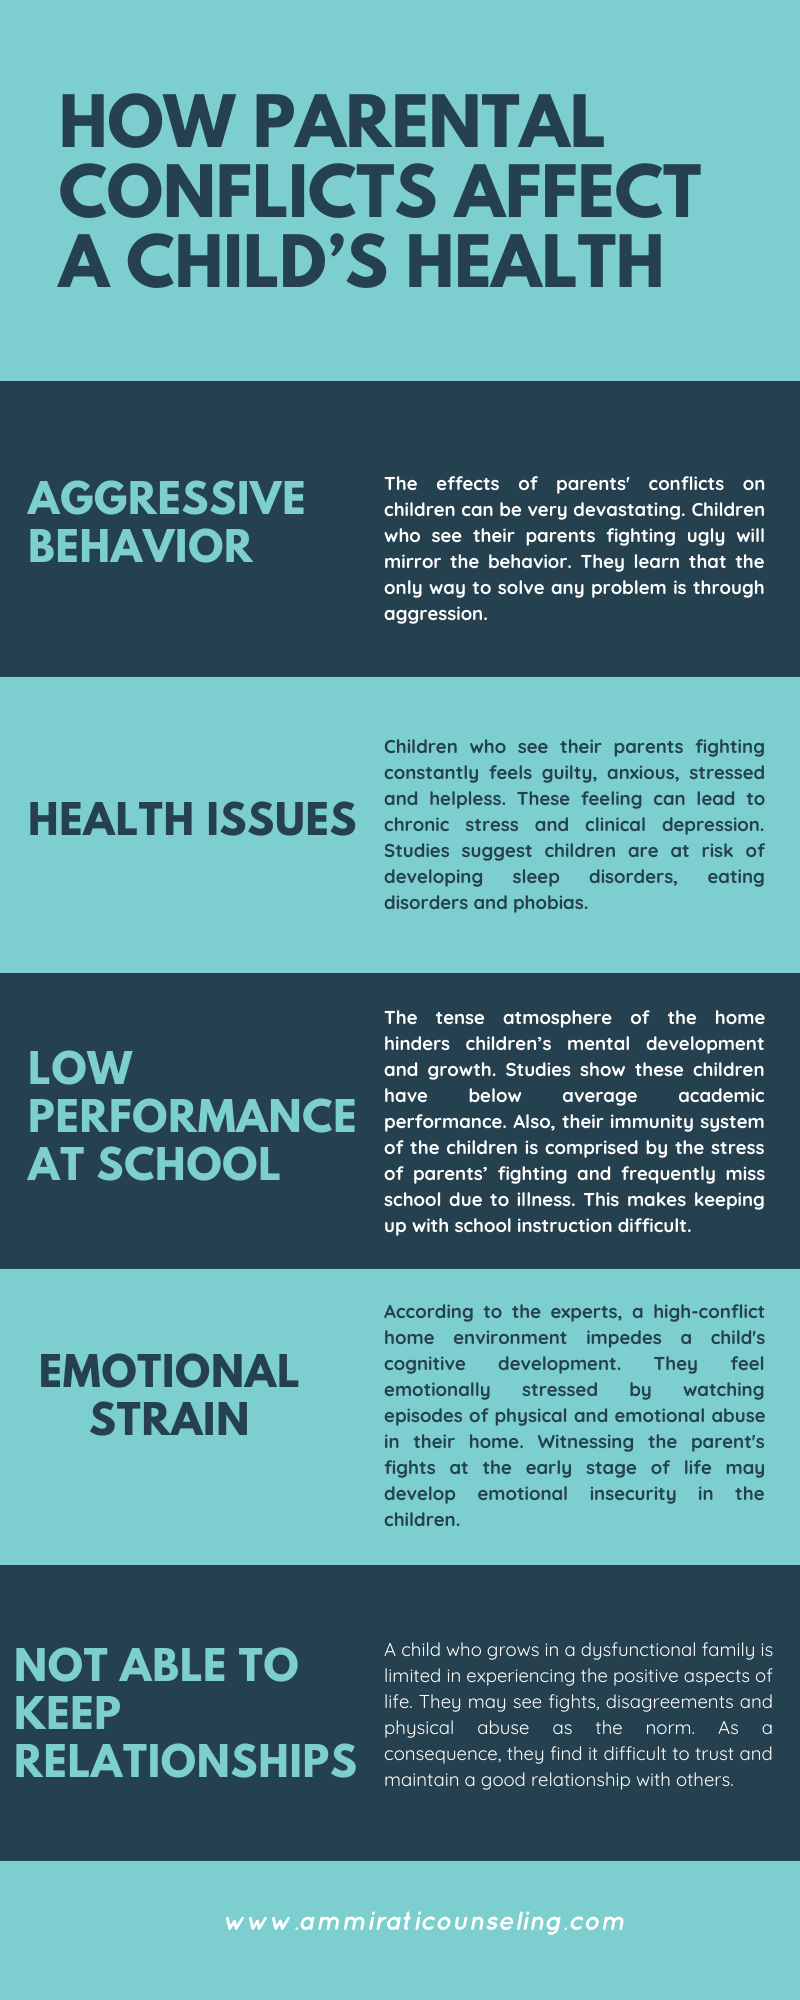 Ammirati Counseling- Parental Conflicts Affect A Child’s Health